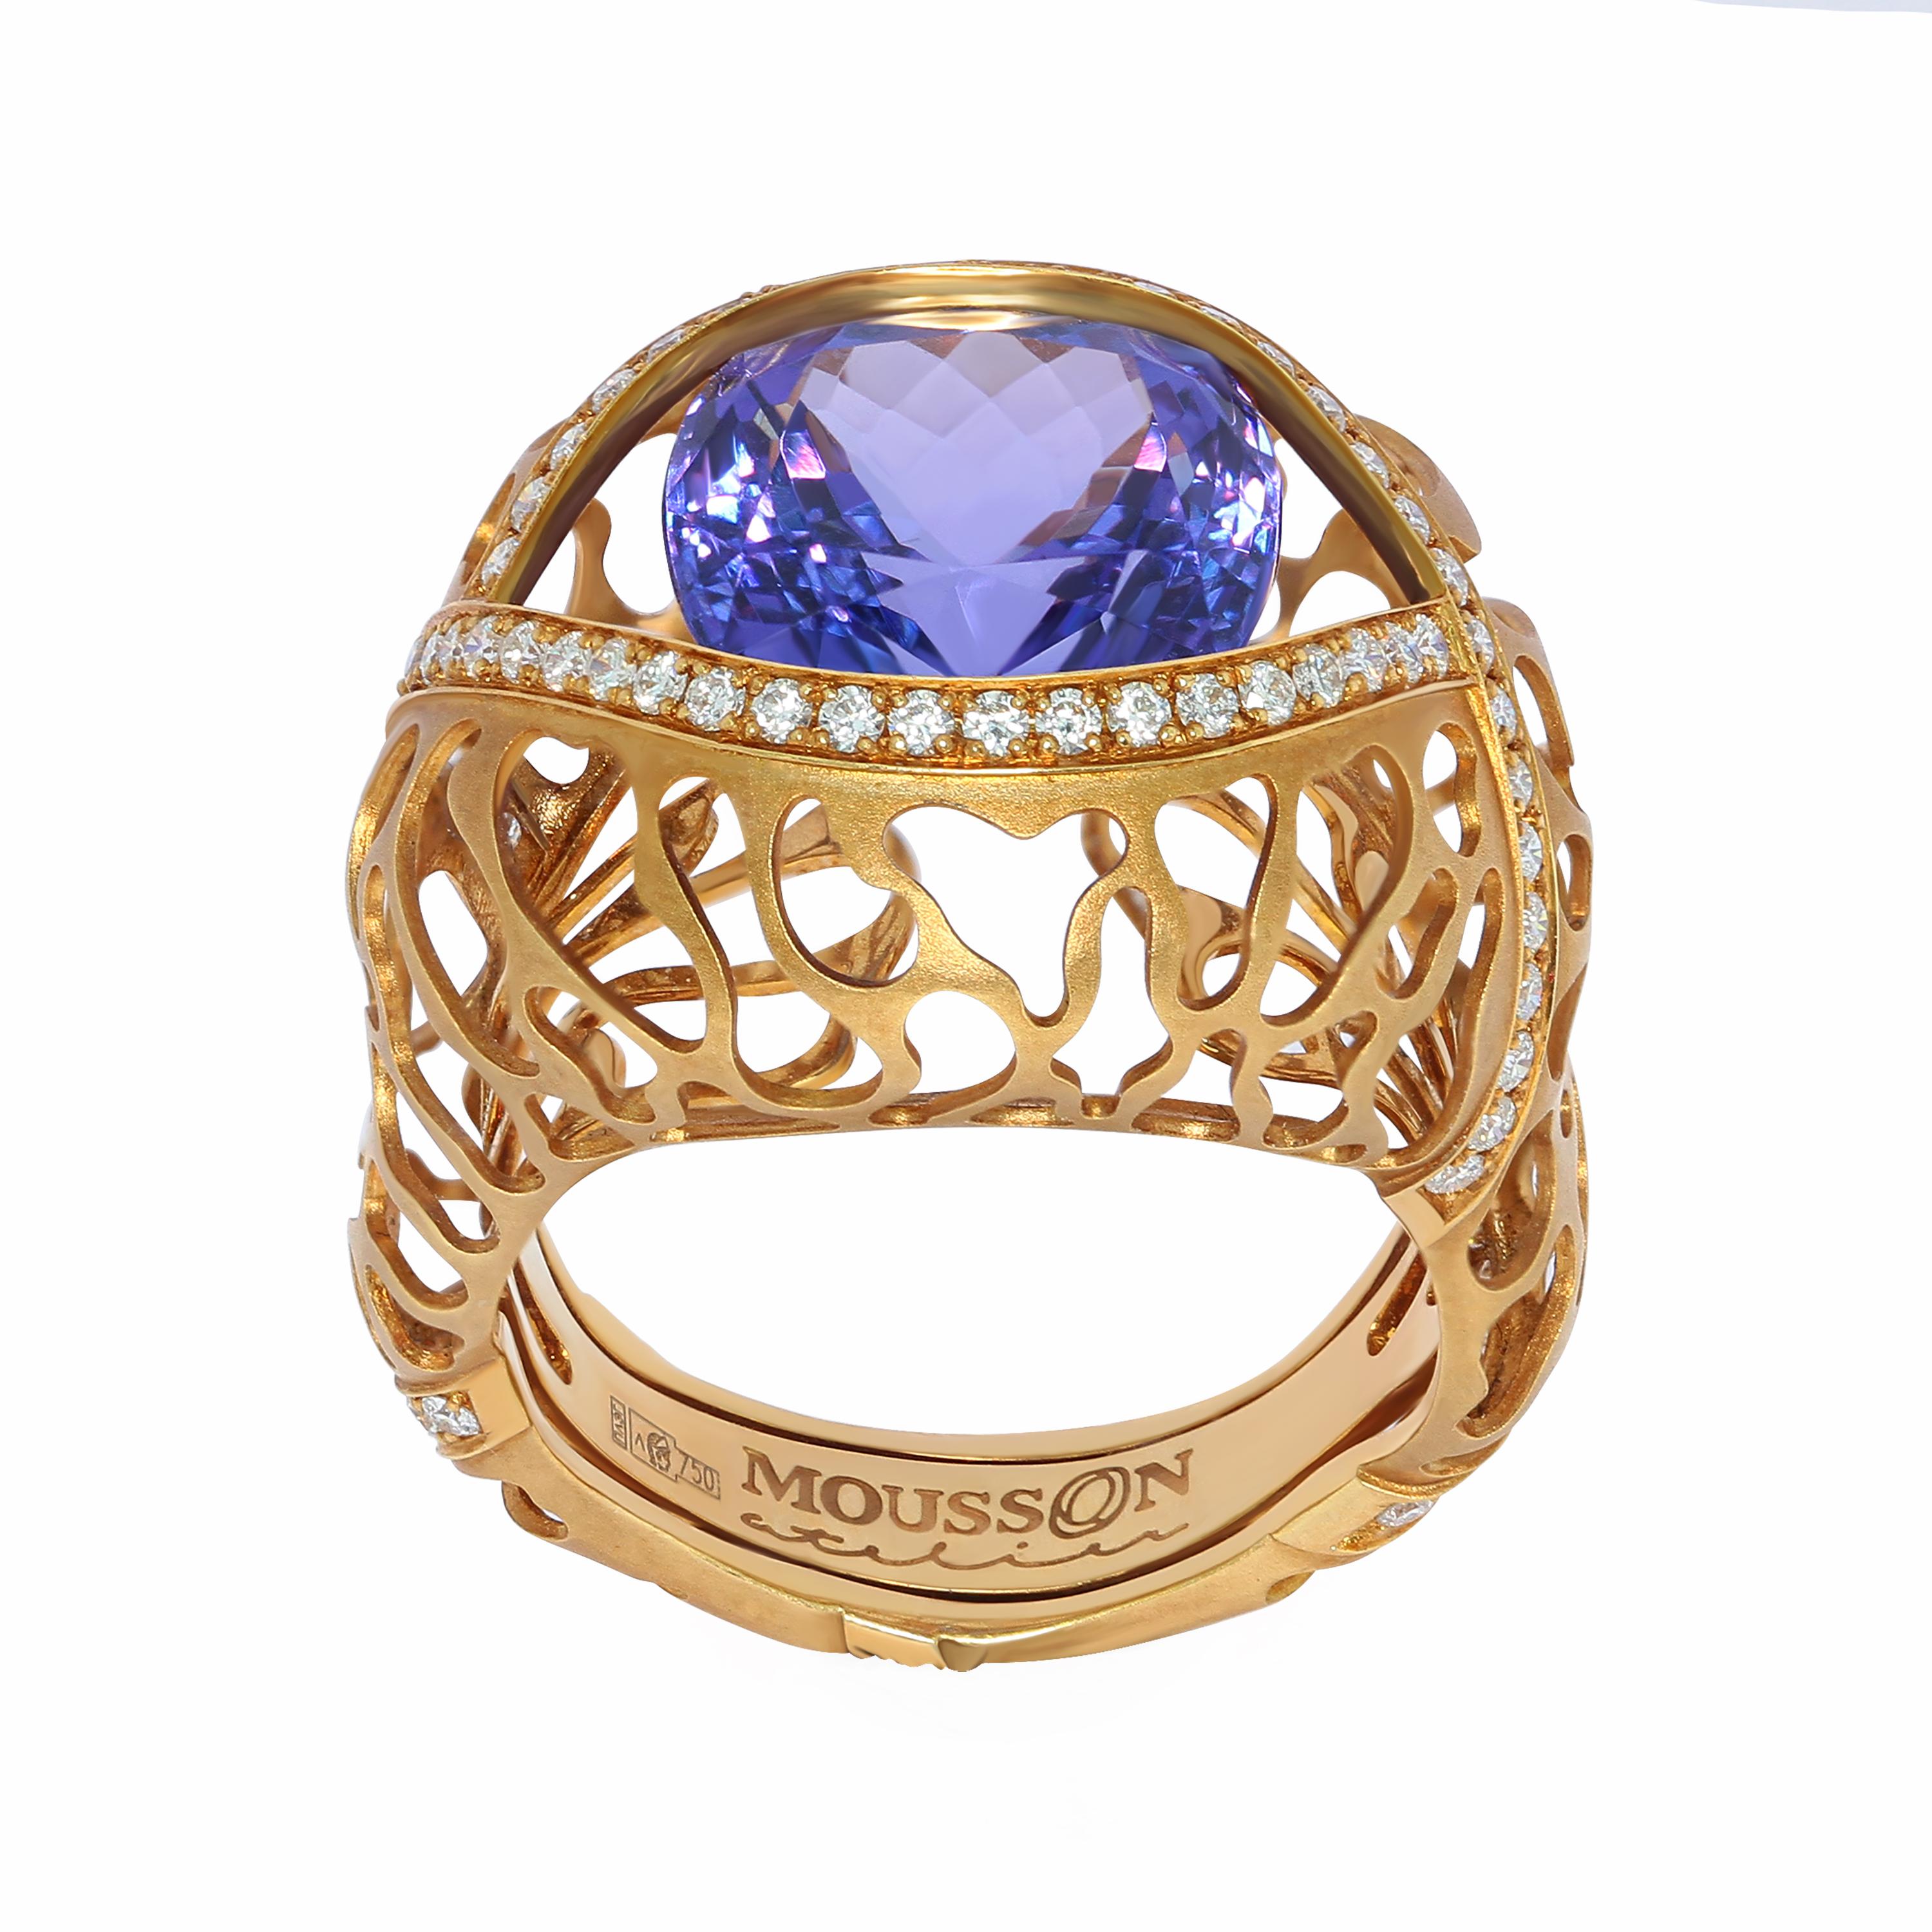 Tanzanite 8.60 Carat Diamonds 18 Karat Yellow Gold Coral Reef Ring
Ring from the Coral Reef collection, where the distinctive feature is the shape of 18 Karat Yellow Gold, made in the form of coral reefs. The perfect combination of 8.60 Carat